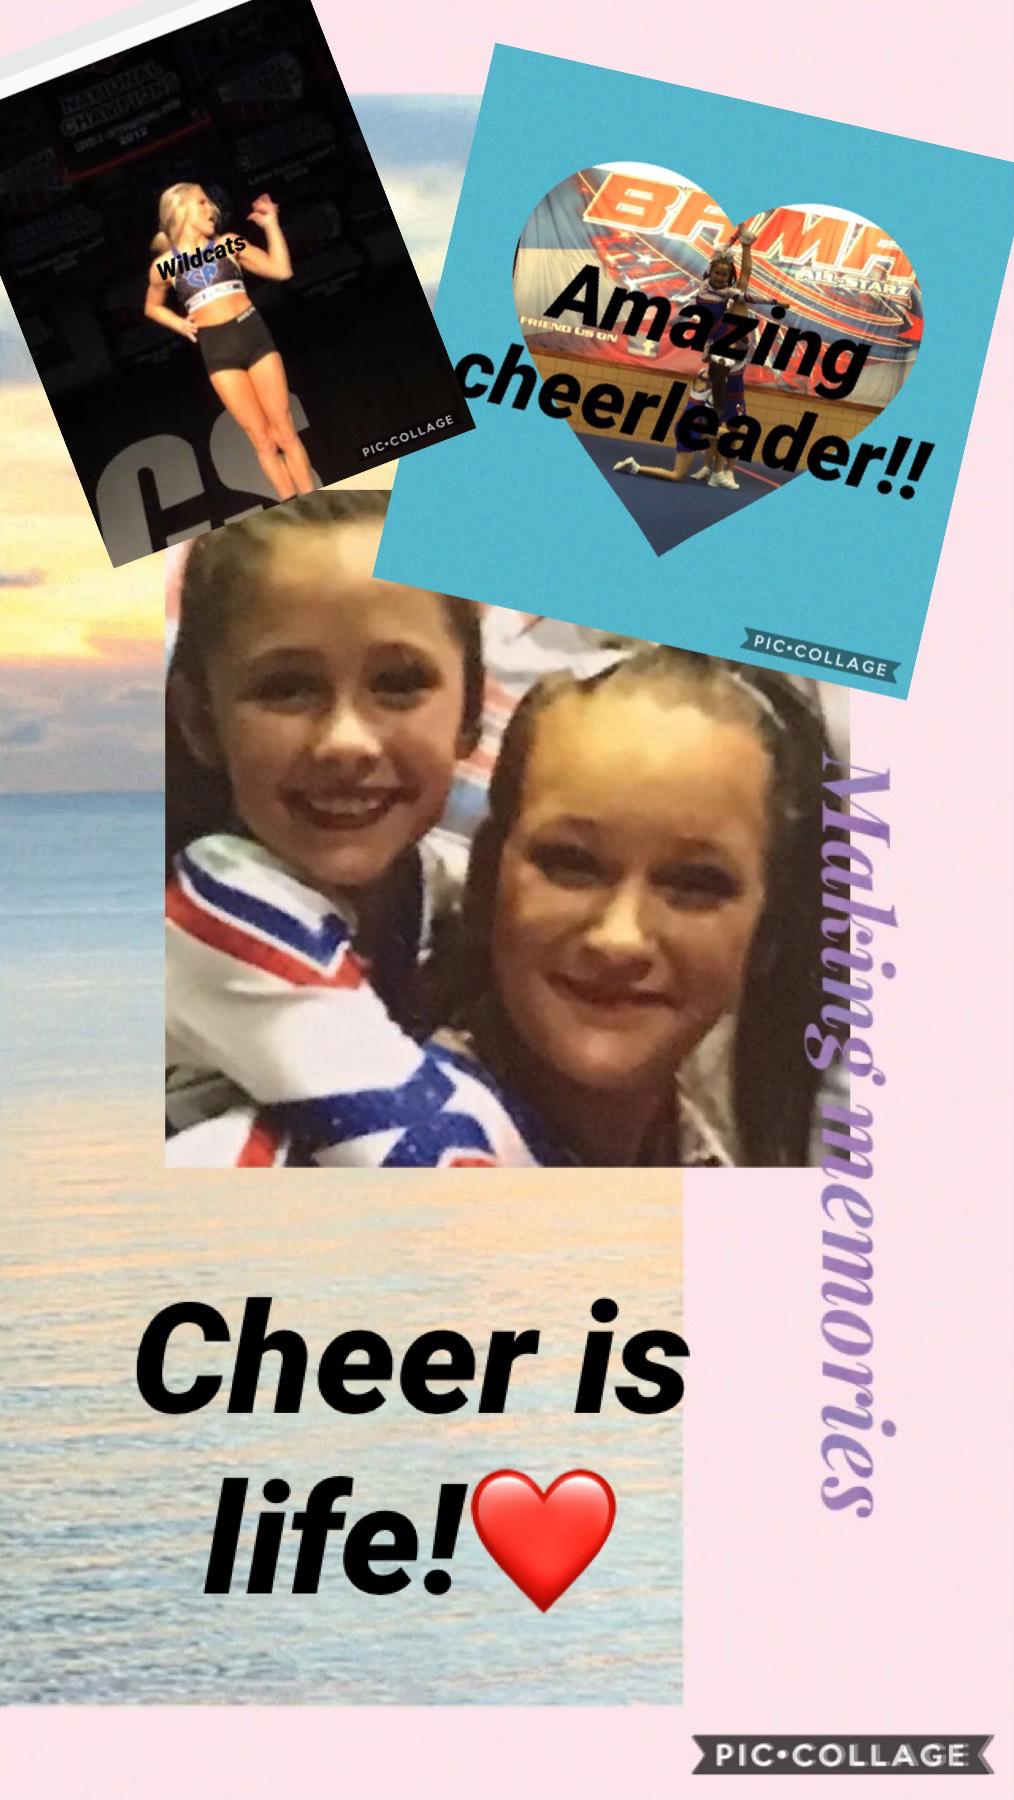 Cheer is life